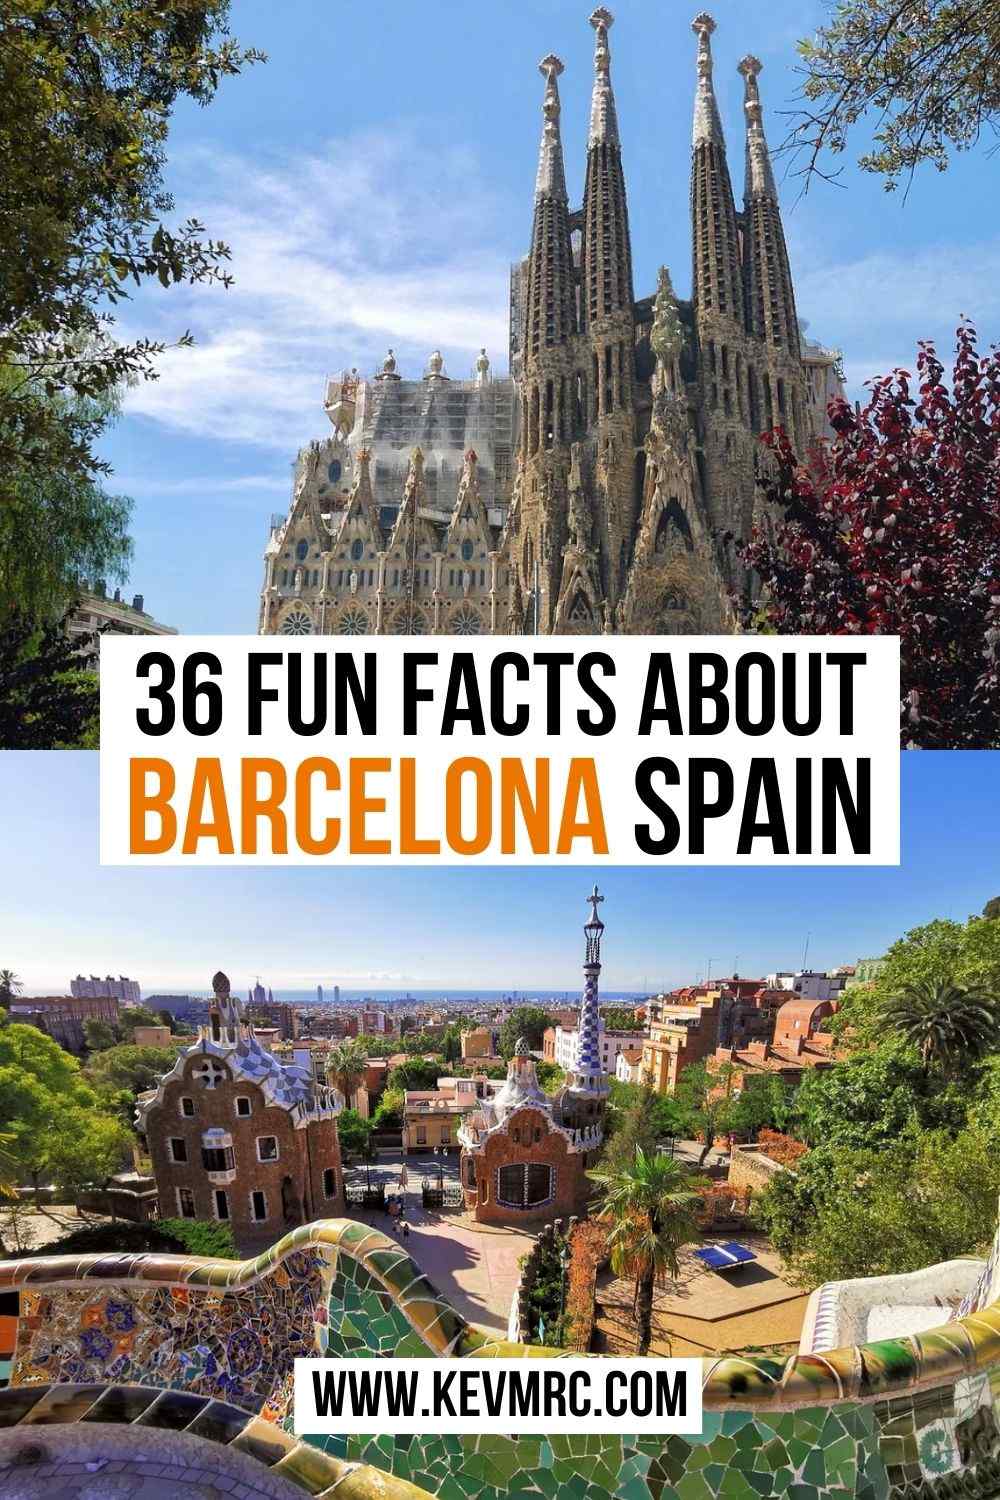 Capital of the region of Catalonia, Barcelona is located in the northeast of Spain, on the Mediterranean Sea. Vibrant, sunny, and rich in culture, it is one of the most attractive and cultural cities in Europe and the most visited city in Spain. Learn more with these 36 interesting facts about Barcelona Spain! barcelona spain facts | barcelona facts | spain facts fun | fun facts about spain #spainfacts #barcelona